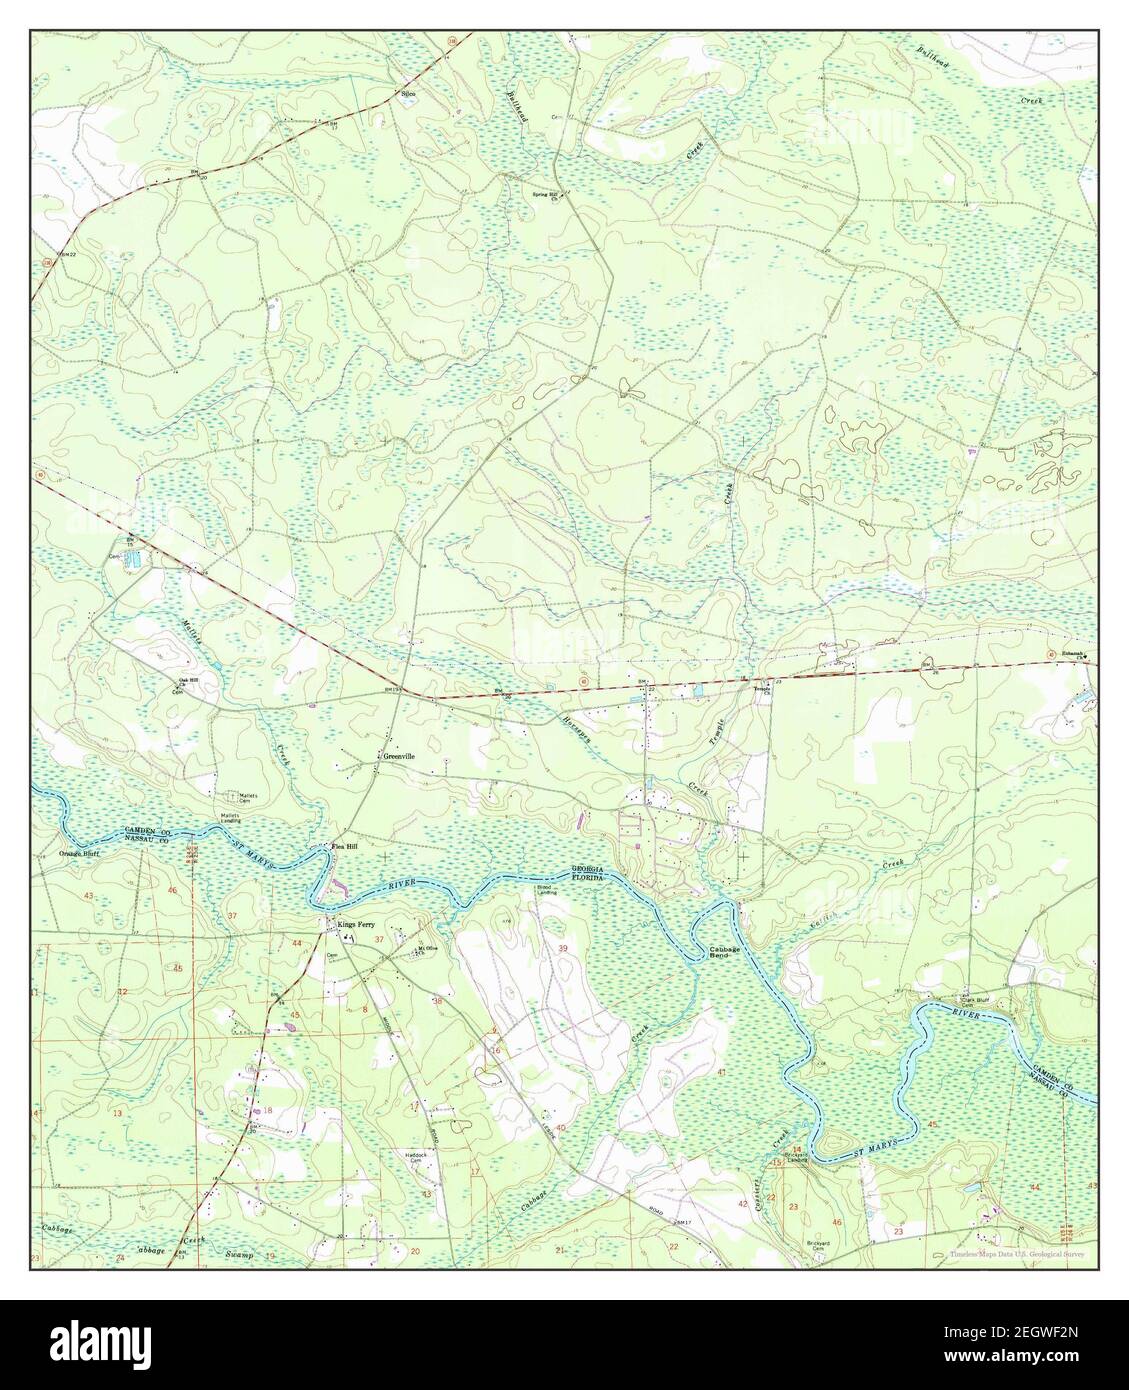 Kings Ferry, Florida, map 1970, 1:24000, United States of America by Timeless Maps, data U.S. Geological Survey Stock Photo